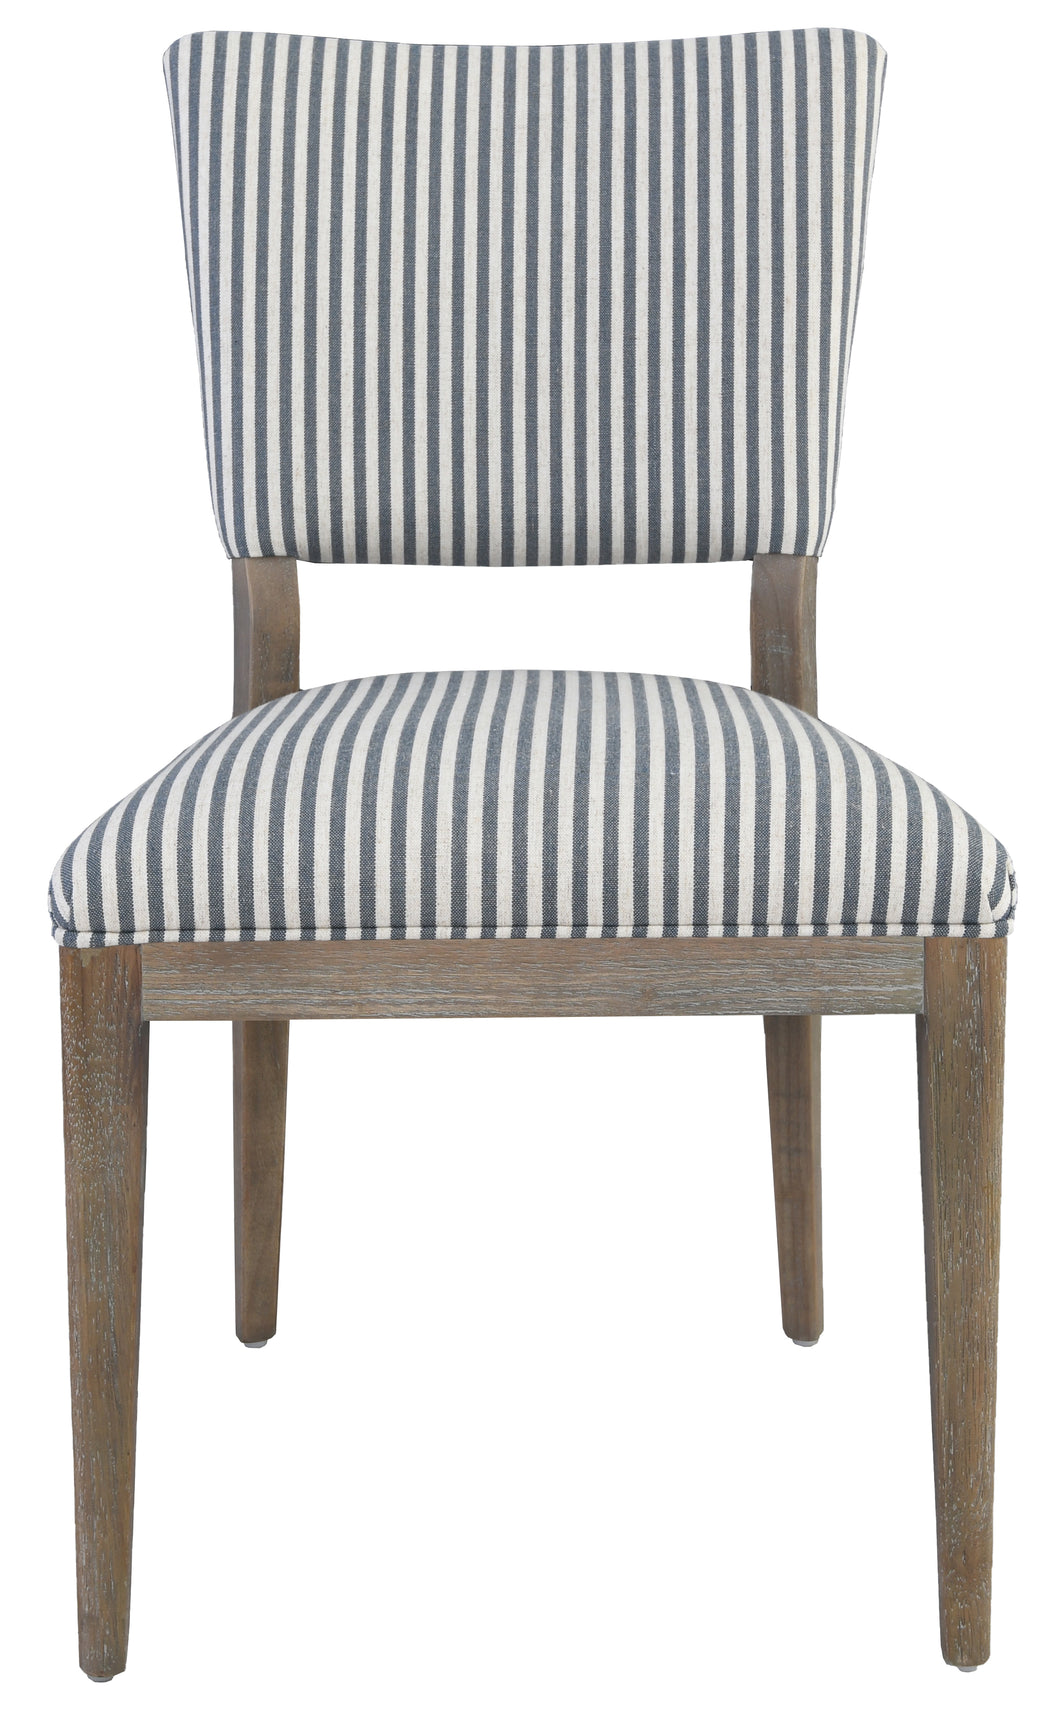 Phillip Upholstered Dining Chair - Striped